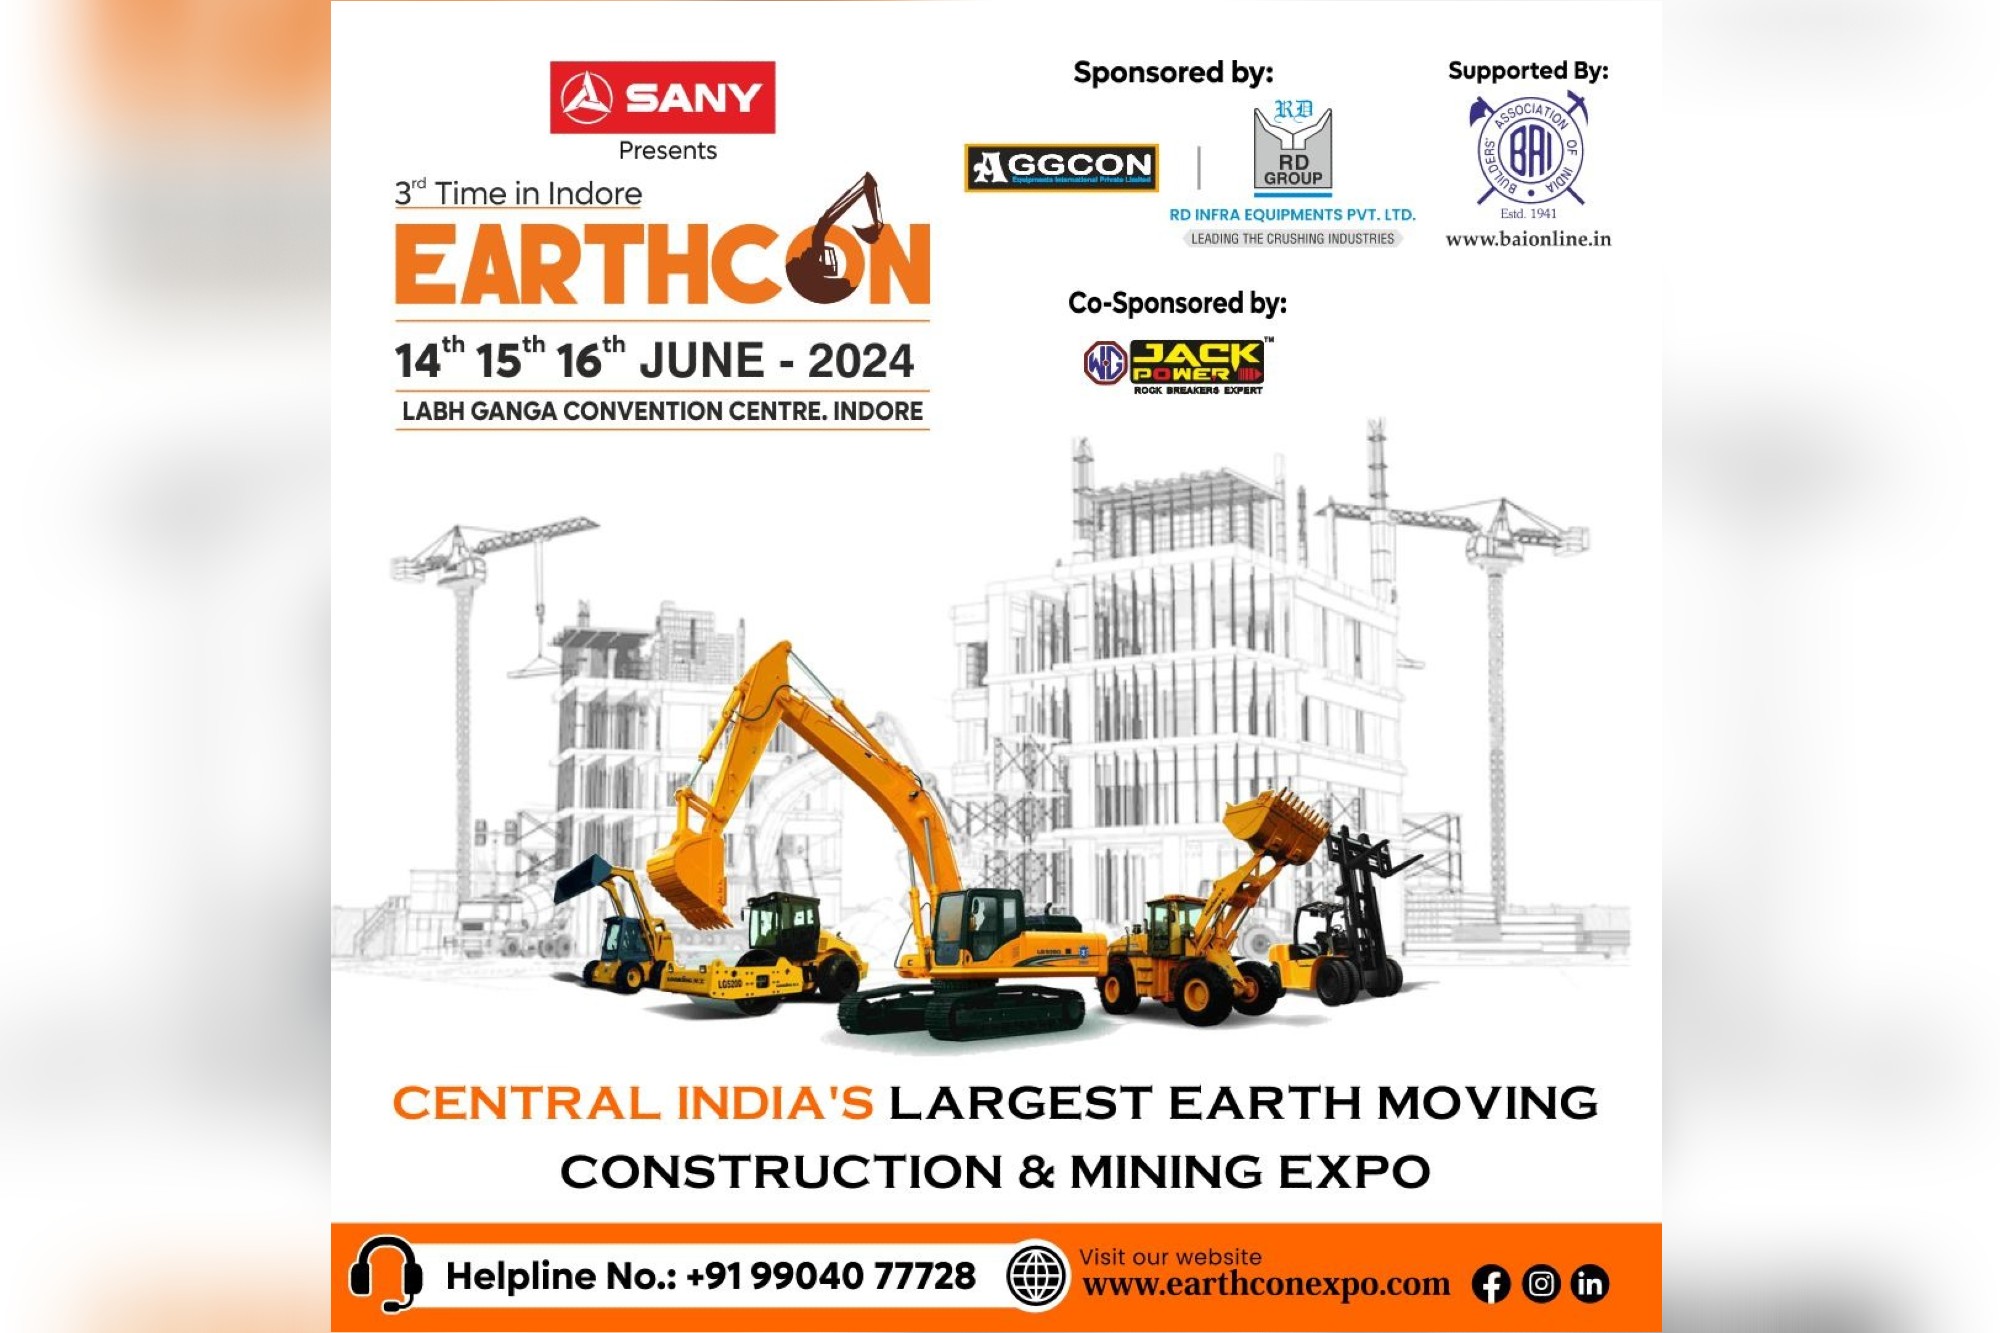 Earthcon Expo propels construction and mining in Indore